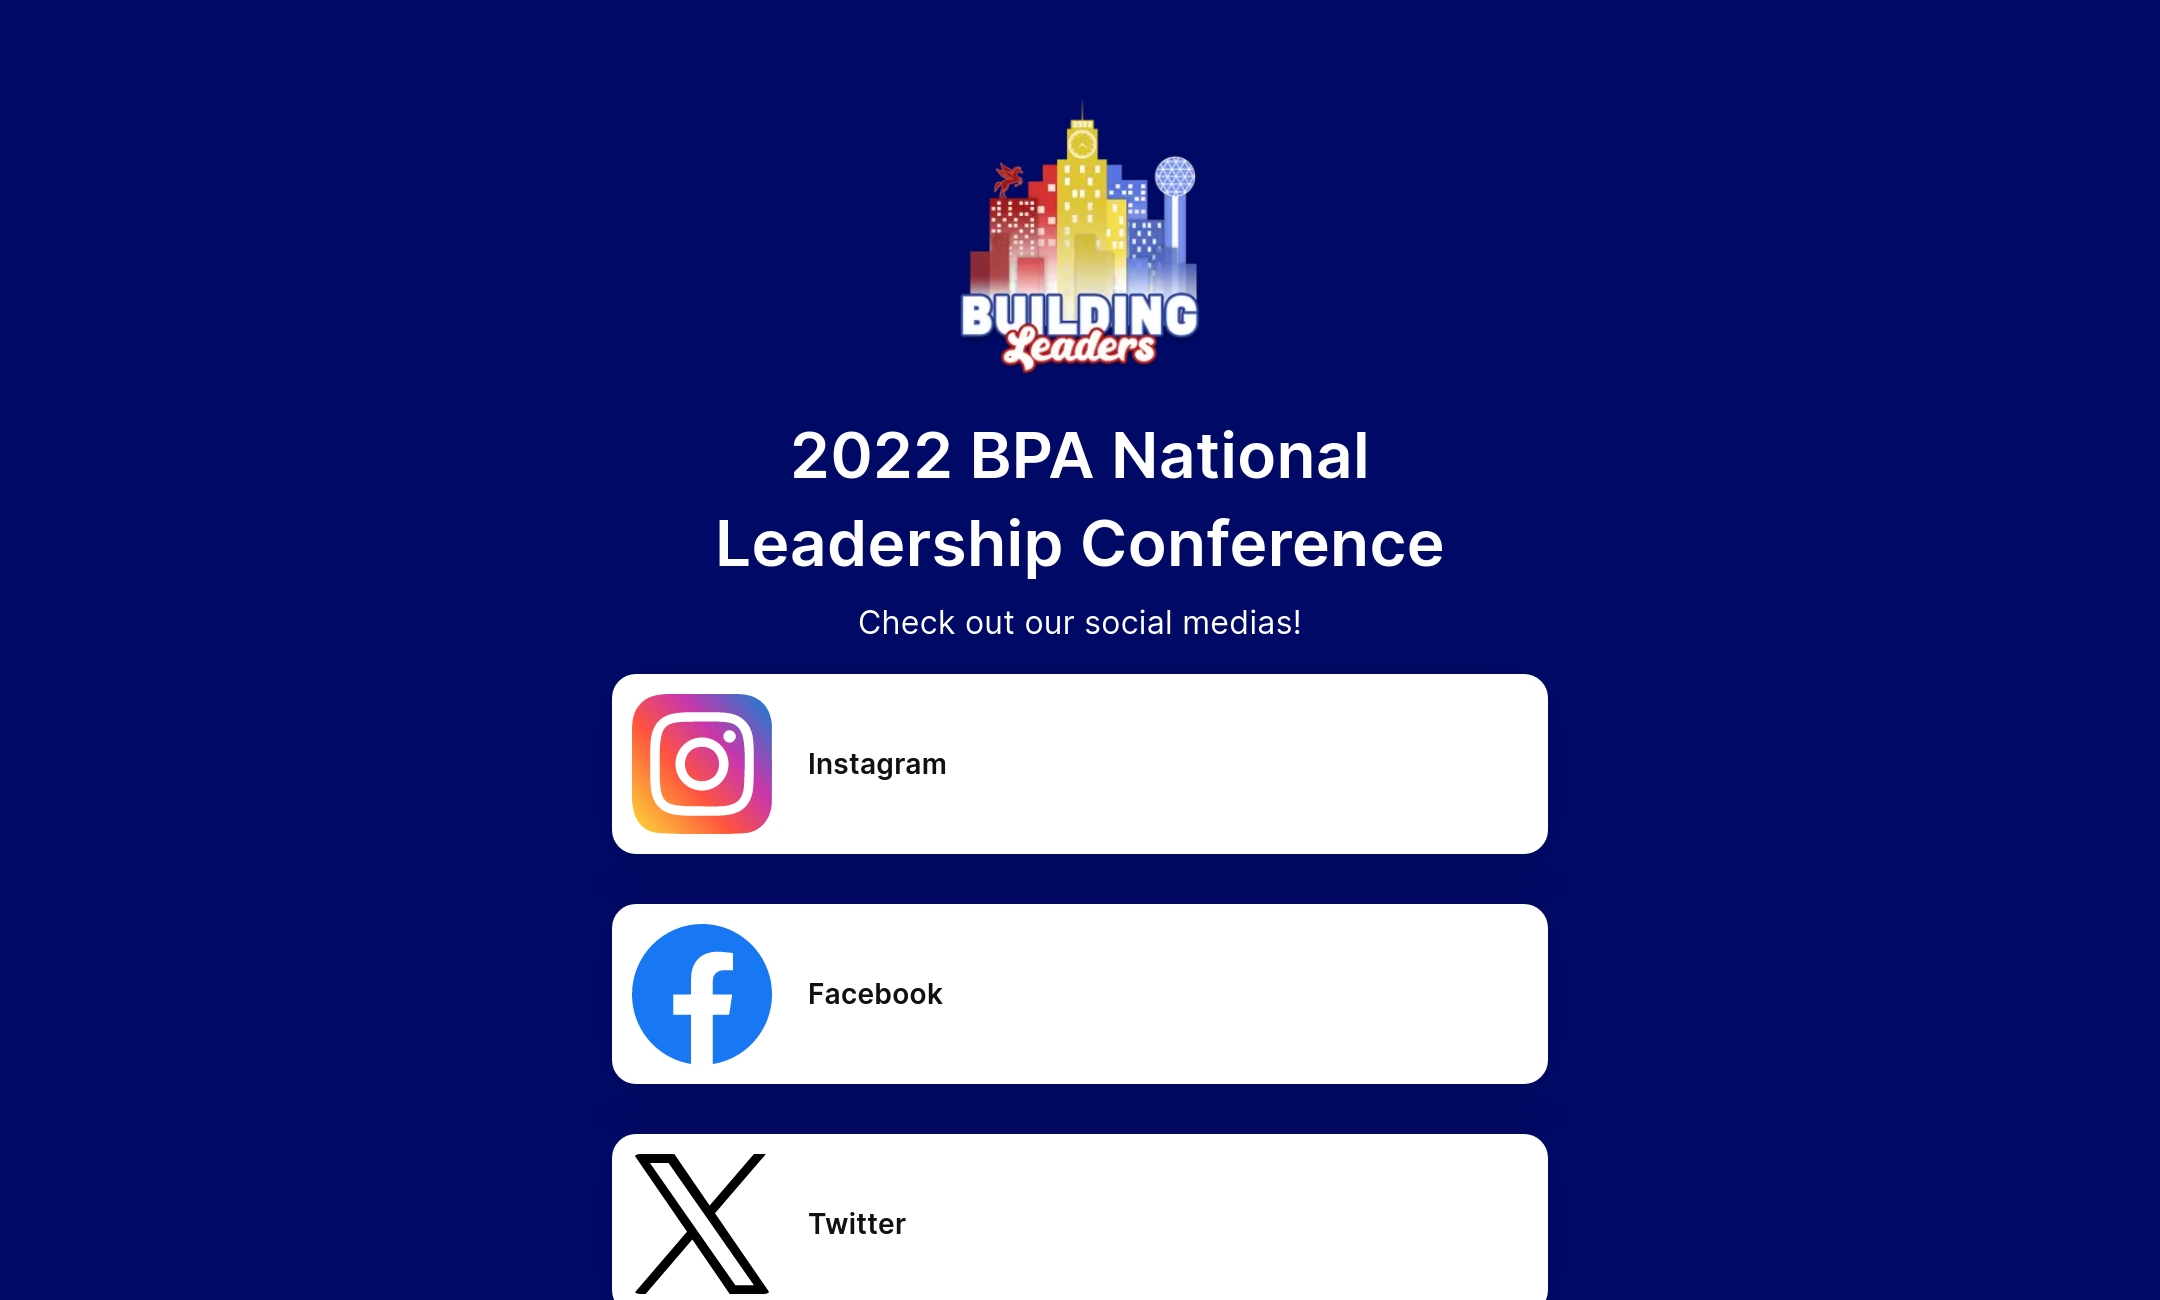 2022 BPA National Leadership Conference's Flowpage